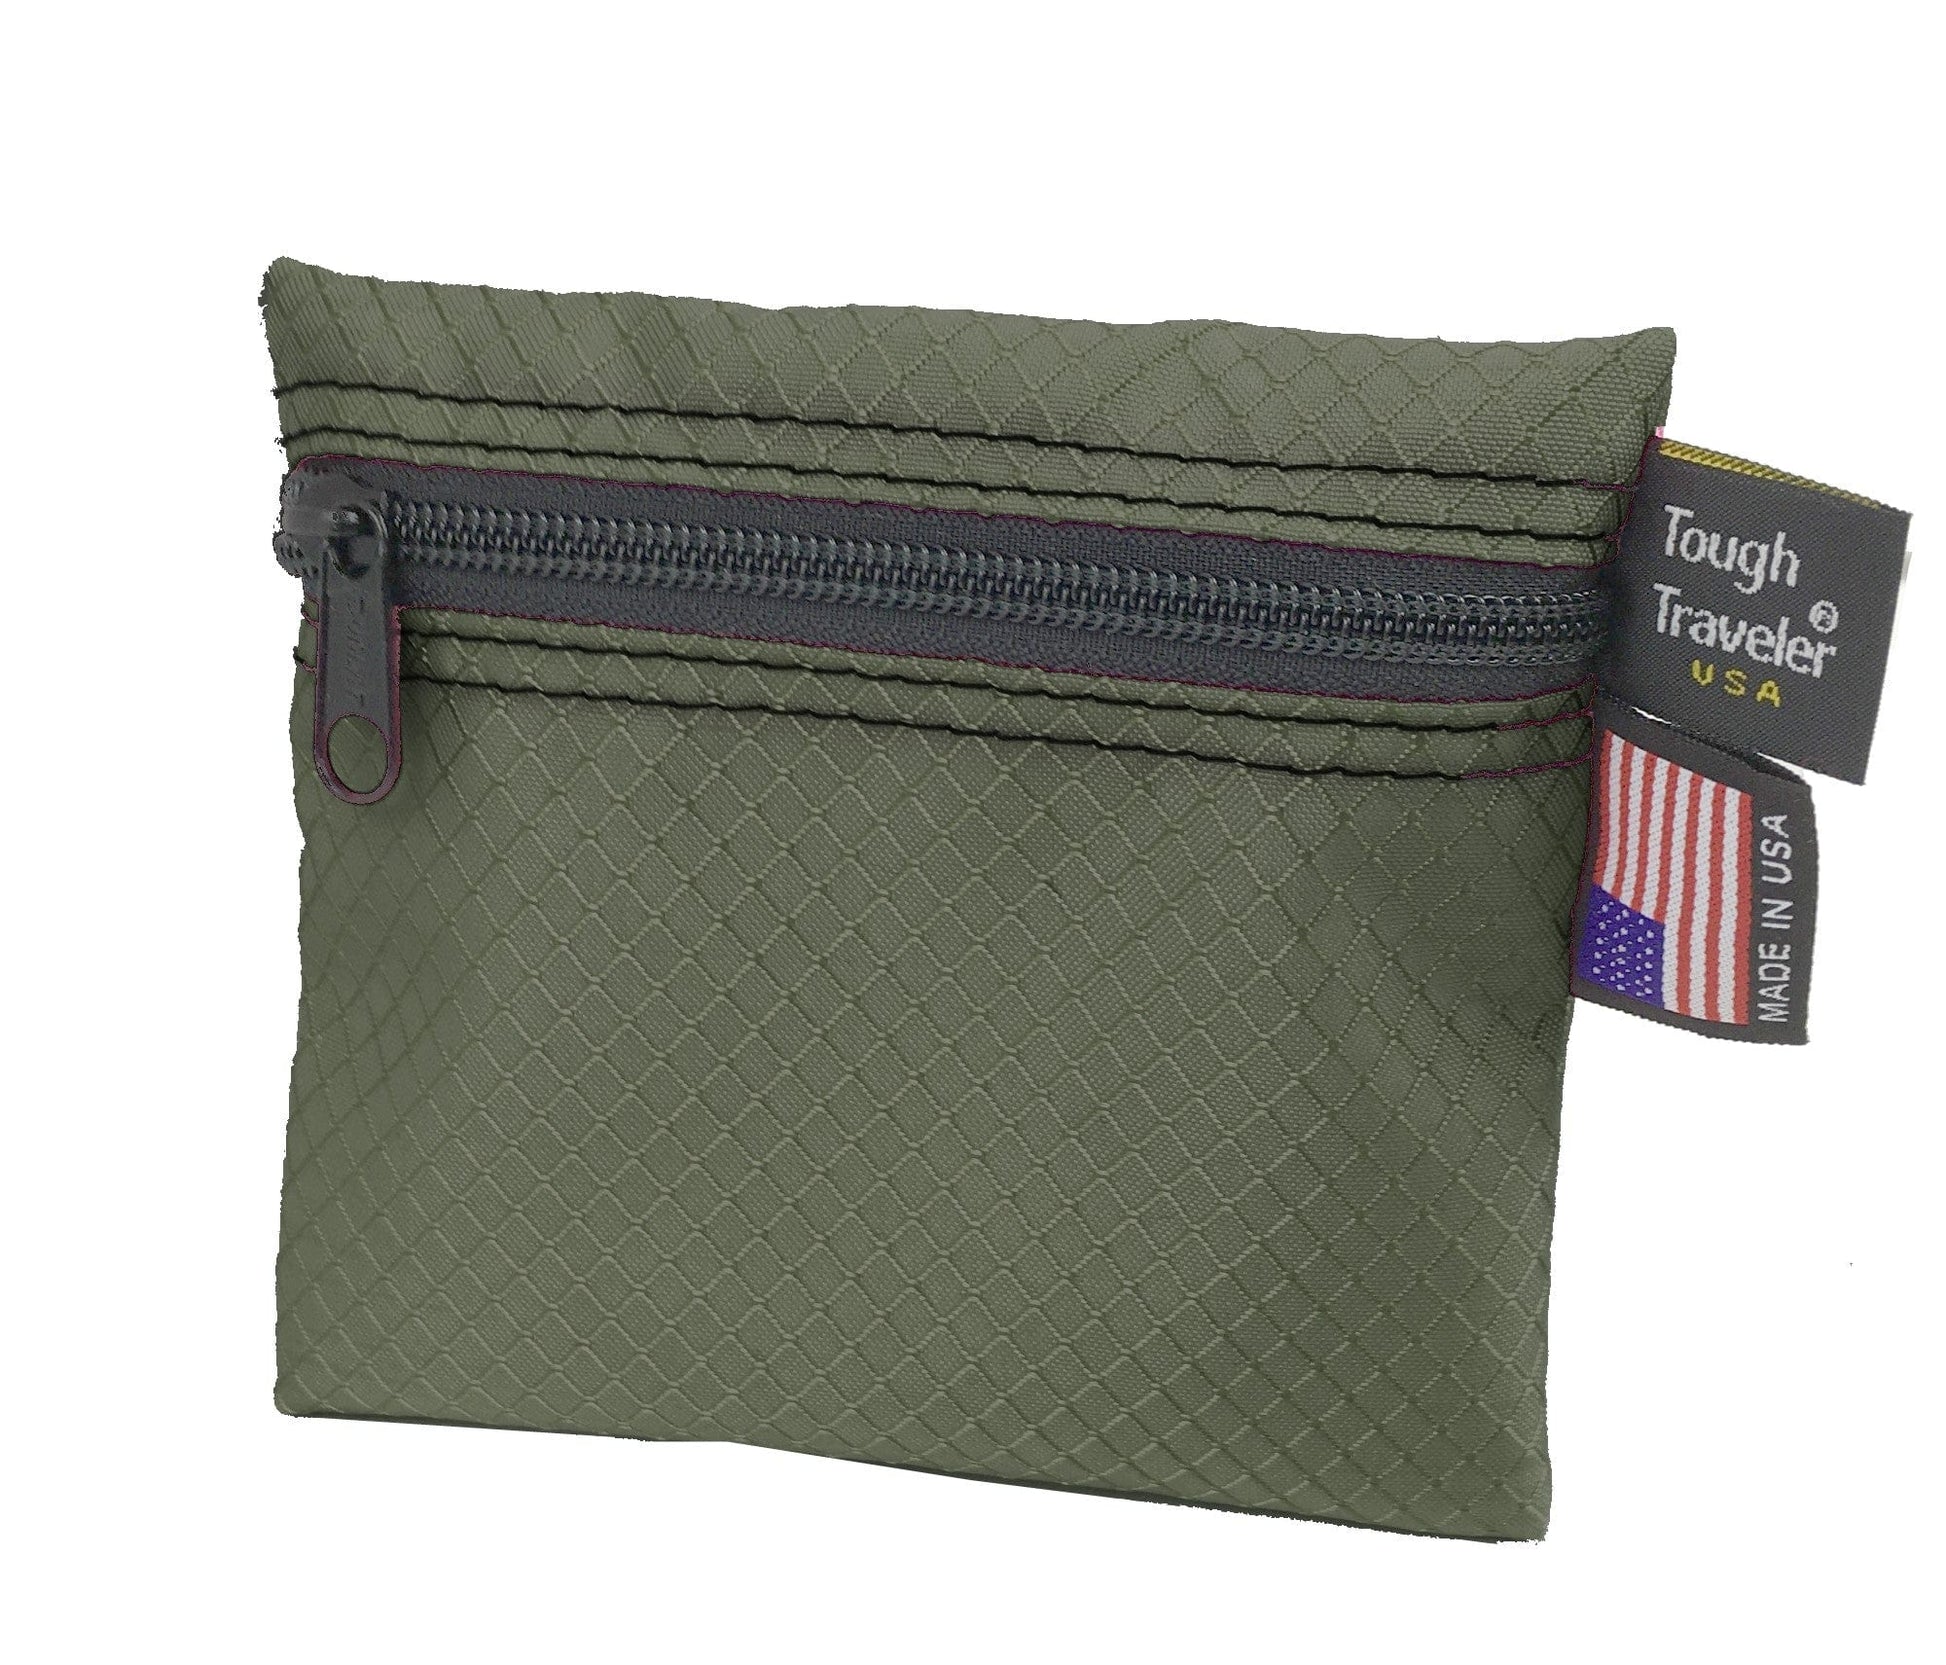 Large Fishing belt pouch made in authentic Cordura 1000D